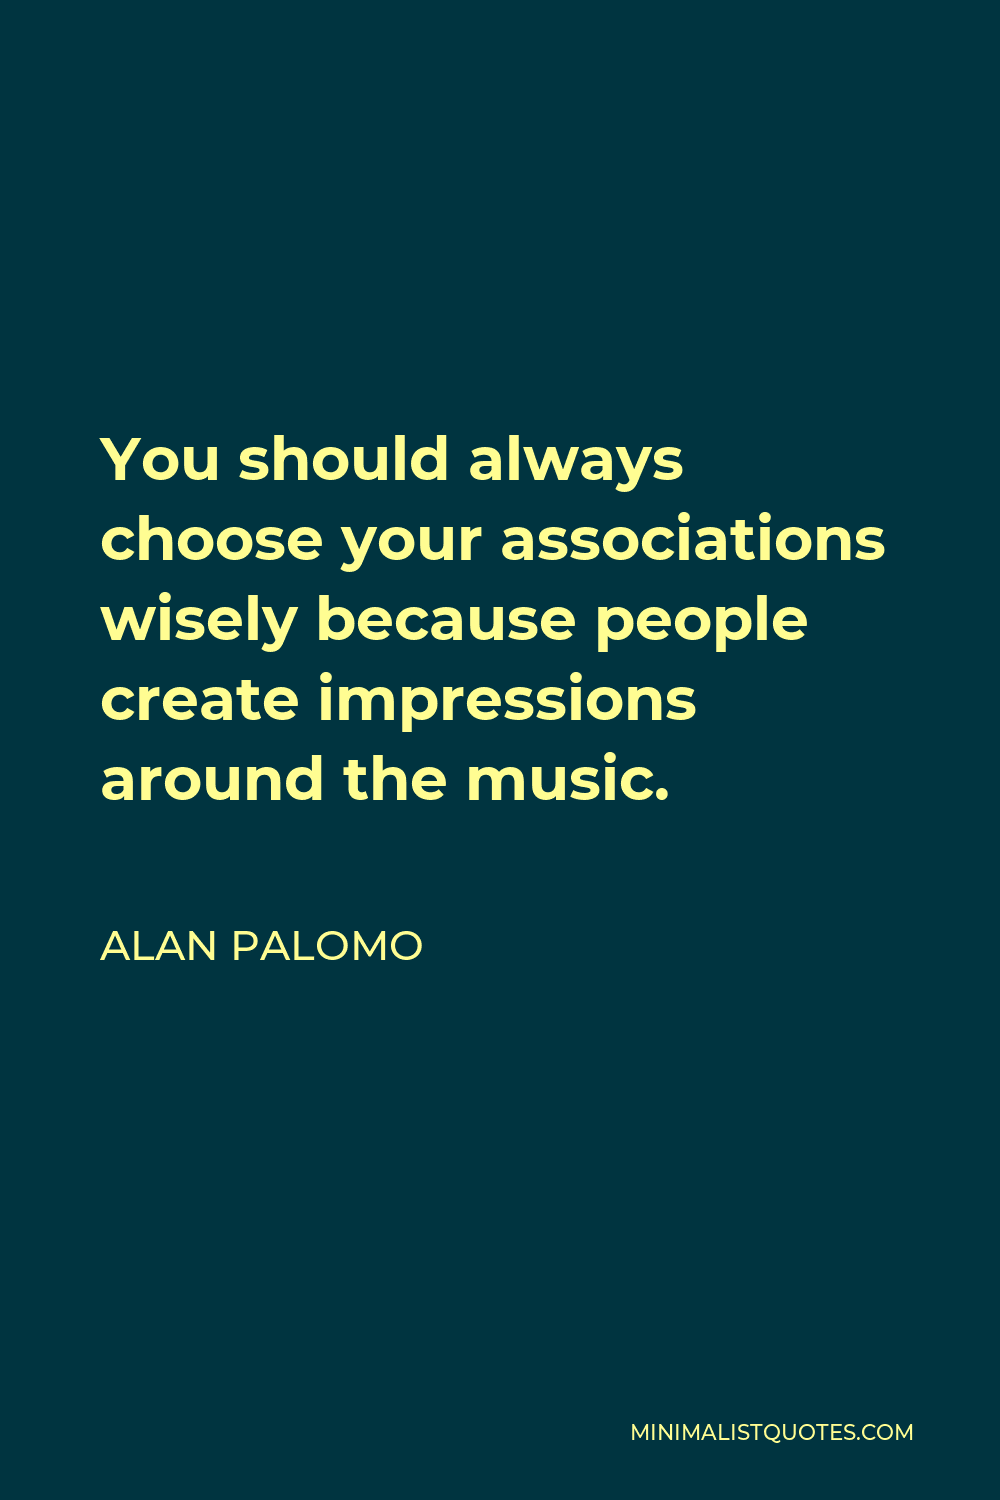 Alan Palomo Quote - You should always choose your associations wisely because people create impressions around the music.